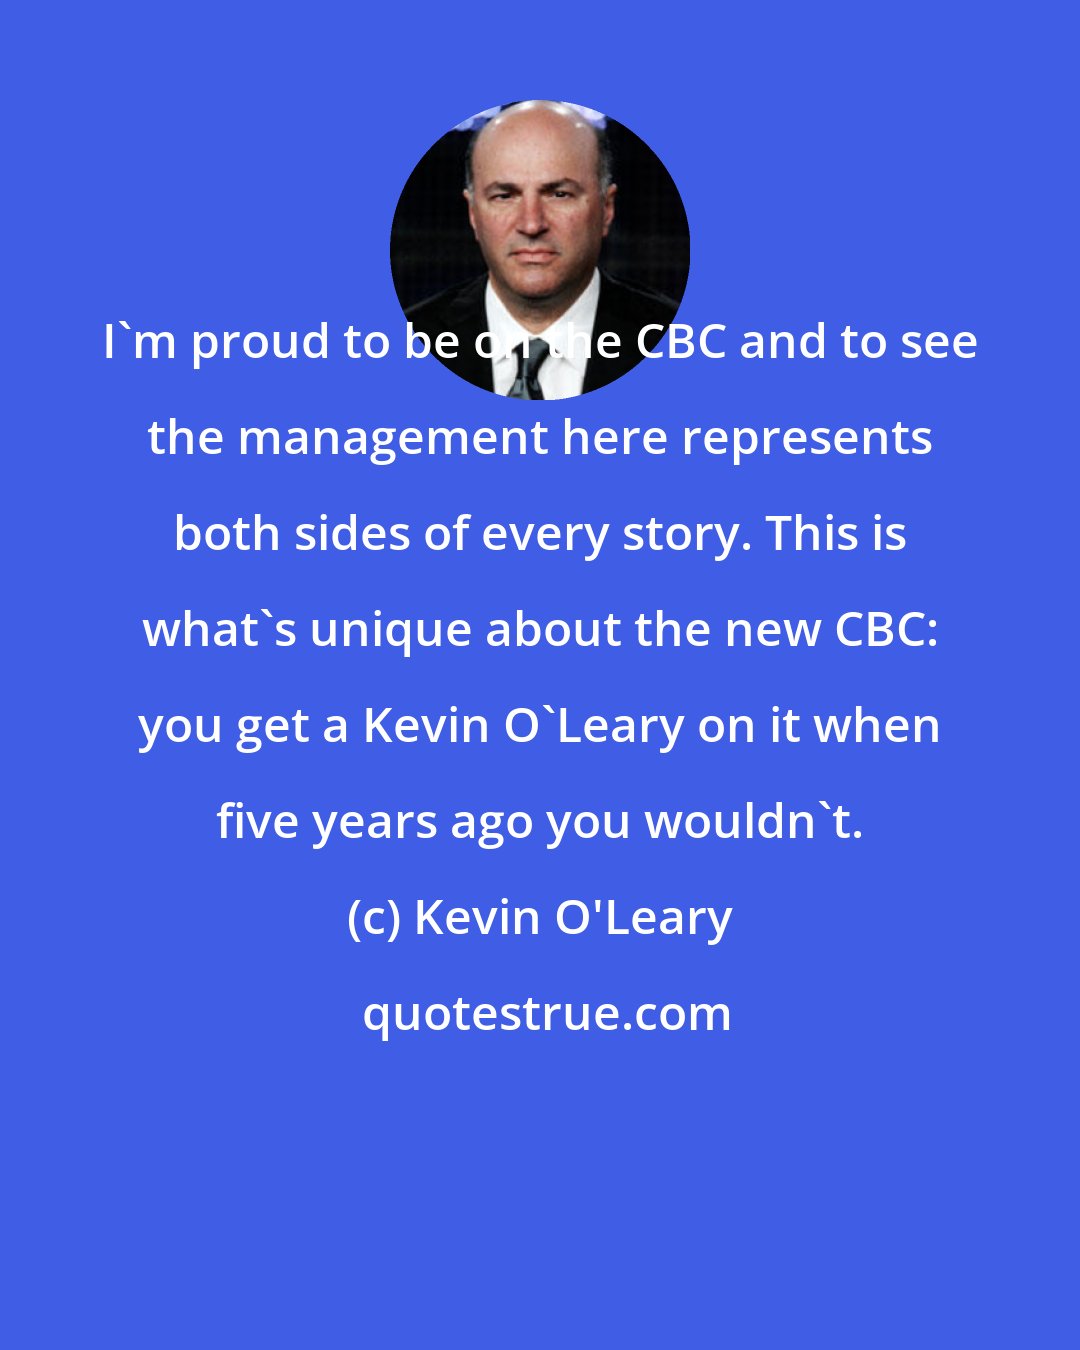 Kevin O'Leary: I'm proud to be on the CBC and to see the management here represents both sides of every story. This is what's unique about the new CBC: you get a Kevin O'Leary on it when five years ago you wouldn't.